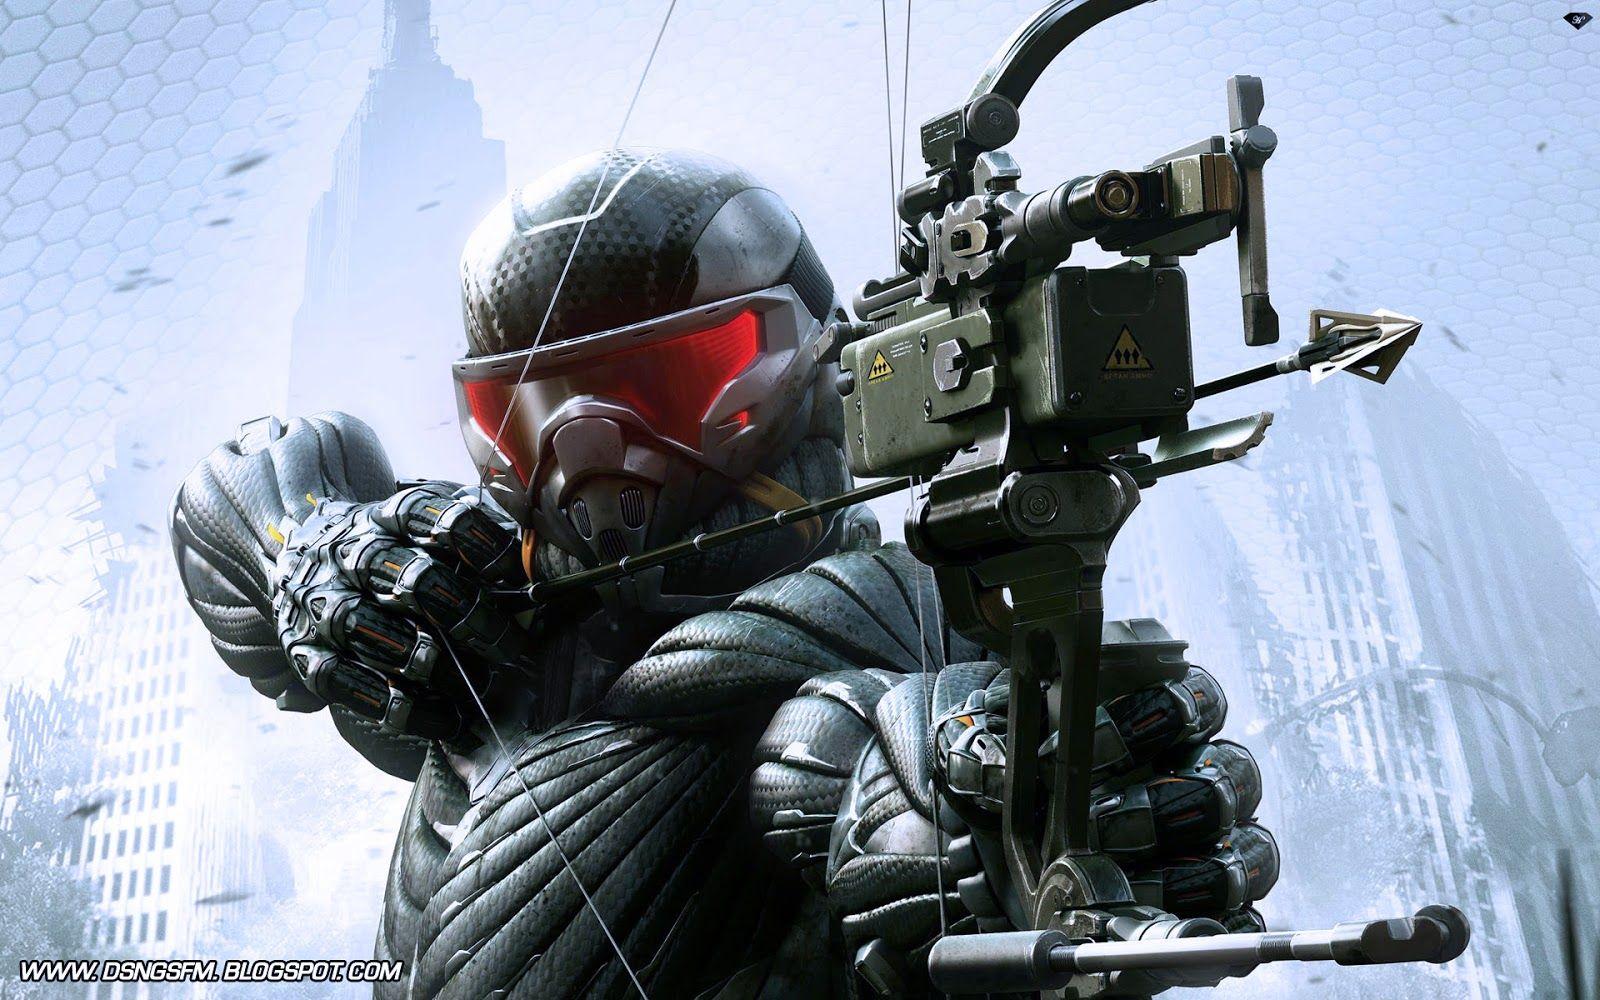 DSNG'S SCI FI MEGAVERSE: COOL SCI FI FUTURISTIC SOLDIERS WALLPAPERS & POSTERS!